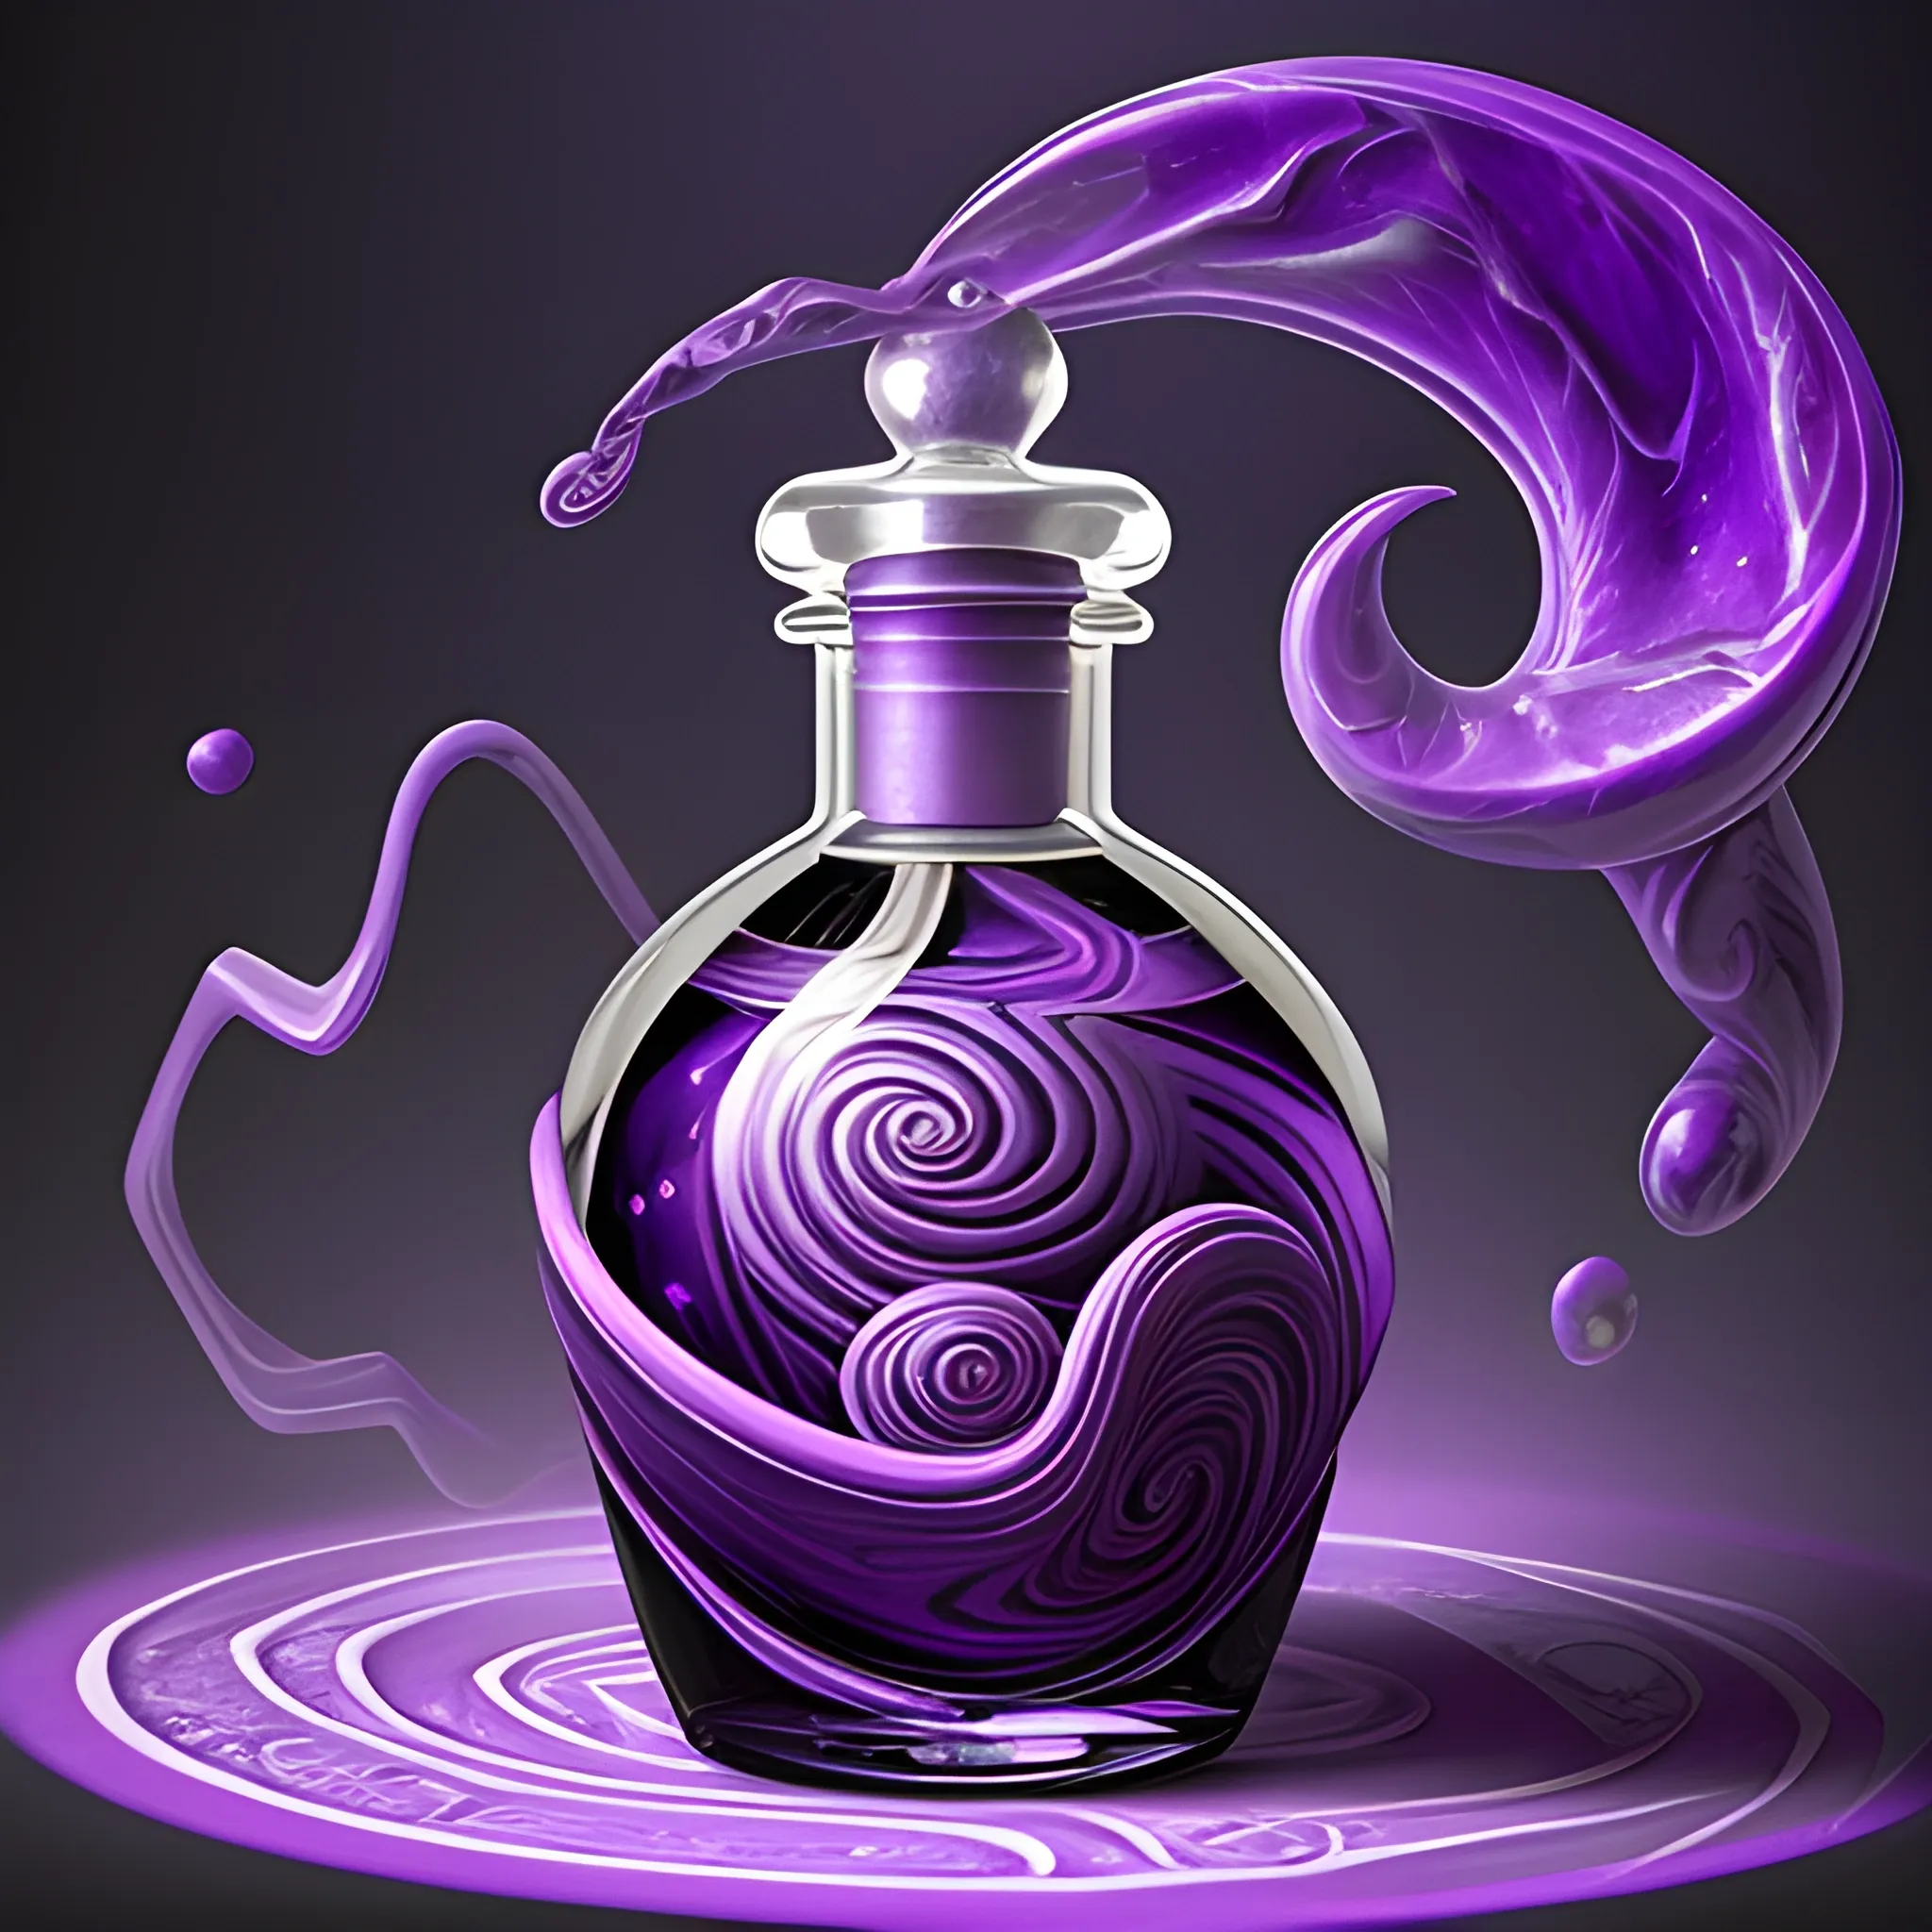 Potion bottle magic mysterious purple DnD mystery swirls MORE MYSTERIOUS
